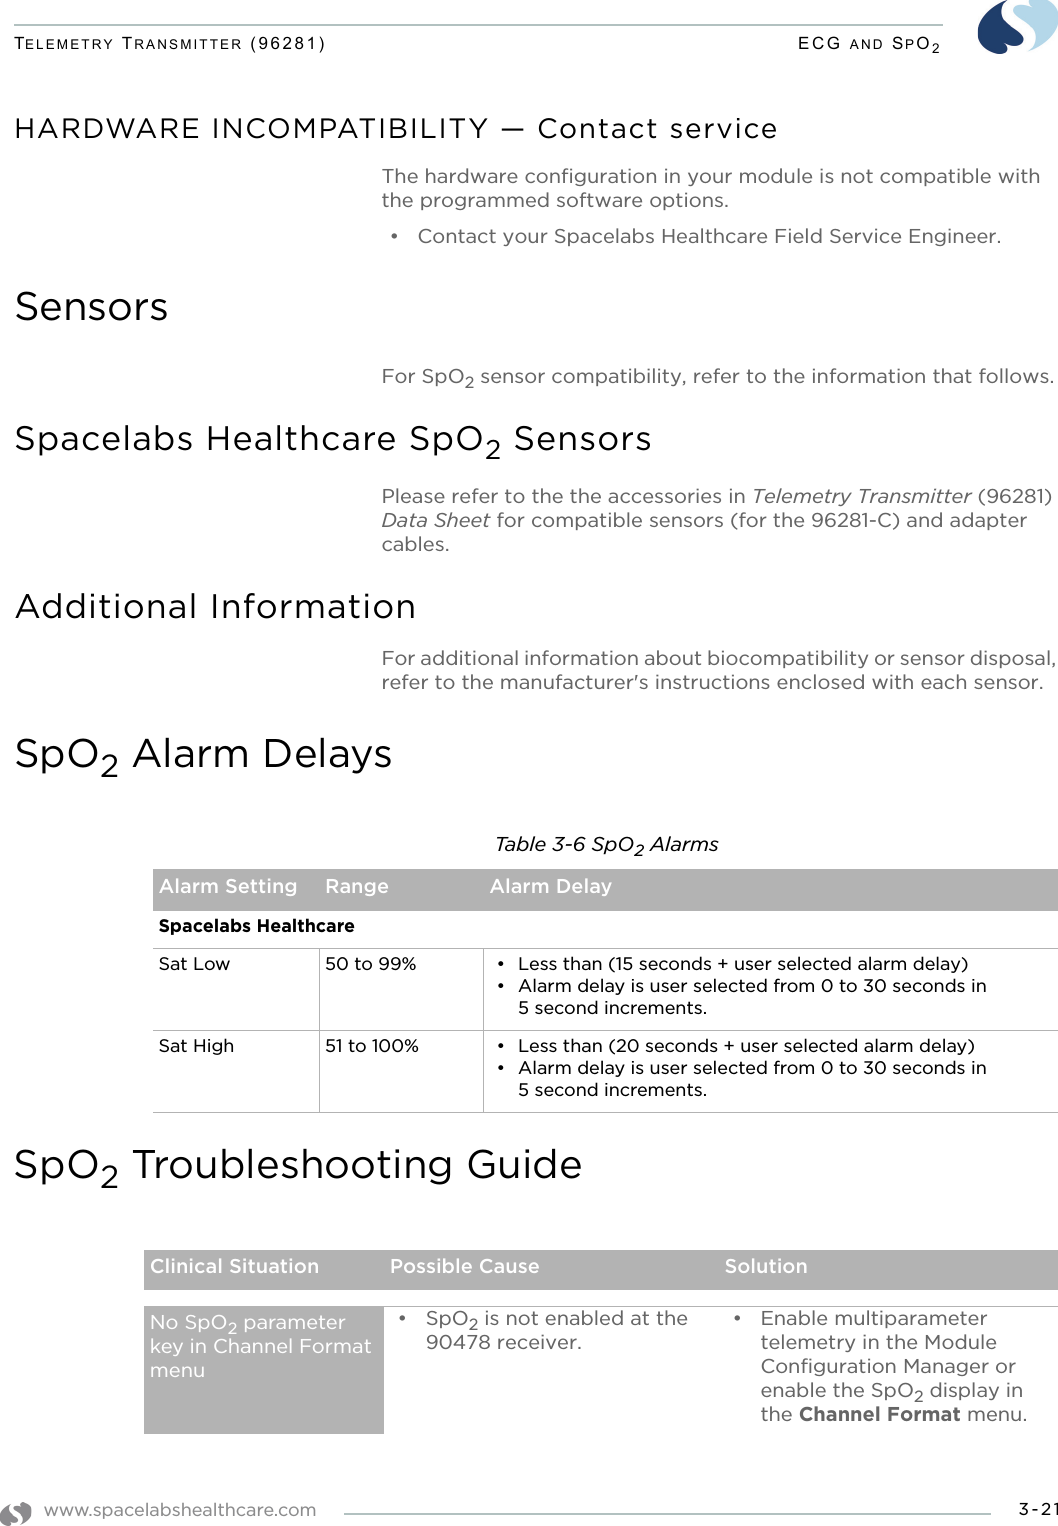 www.spacelabshealthcare.com 3-21TELEMETRY TRANSMITTER (96281) ECG AND SPO2HARDWARE INCOMPATIBILITY — Contact serviceThe hardware configuration in your module is not compatible with the programmed software options.• Contact your Spacelabs Healthcare Field Service Engineer.SensorsFor SpO2 sensor compatibility, refer to the information that follows.Spacelabs Healthcare SpO2 SensorsPlease refer to the the accessories in Telemetry Transmitter (96281) Data Sheet for compatible sensors (for the 96281-C) and adapter cables.Additional InformationFor additional information about biocompatibility or sensor disposal, refer to the manufacturer&apos;s instructions enclosed with each sensor.SpO2 Alarm DelaysSpO2 Troubleshooting GuideTable 3-6 SpO2 AlarmsAlarm Setting Range Alarm DelaySpacelabs HealthcareSat Low  50 to 99% • Less than (15 seconds + user selected alarm delay) • Alarm delay is user selected from 0 to 30 seconds in 5 second increments.Sat High  51 to 100% • Less than (20 seconds + user selected alarm delay)• Alarm delay is user selected from 0 to 30 seconds in 5 second increments.Clinical Situation Possible Cause SolutionNo SpO2 parameter key in Channel Format menu•SpO2 is not enabled at the 90478 receiver.• Enable multiparameter telemetry in the Module Configuration Manager or enable the SpO2 display in the Channel Format menu.